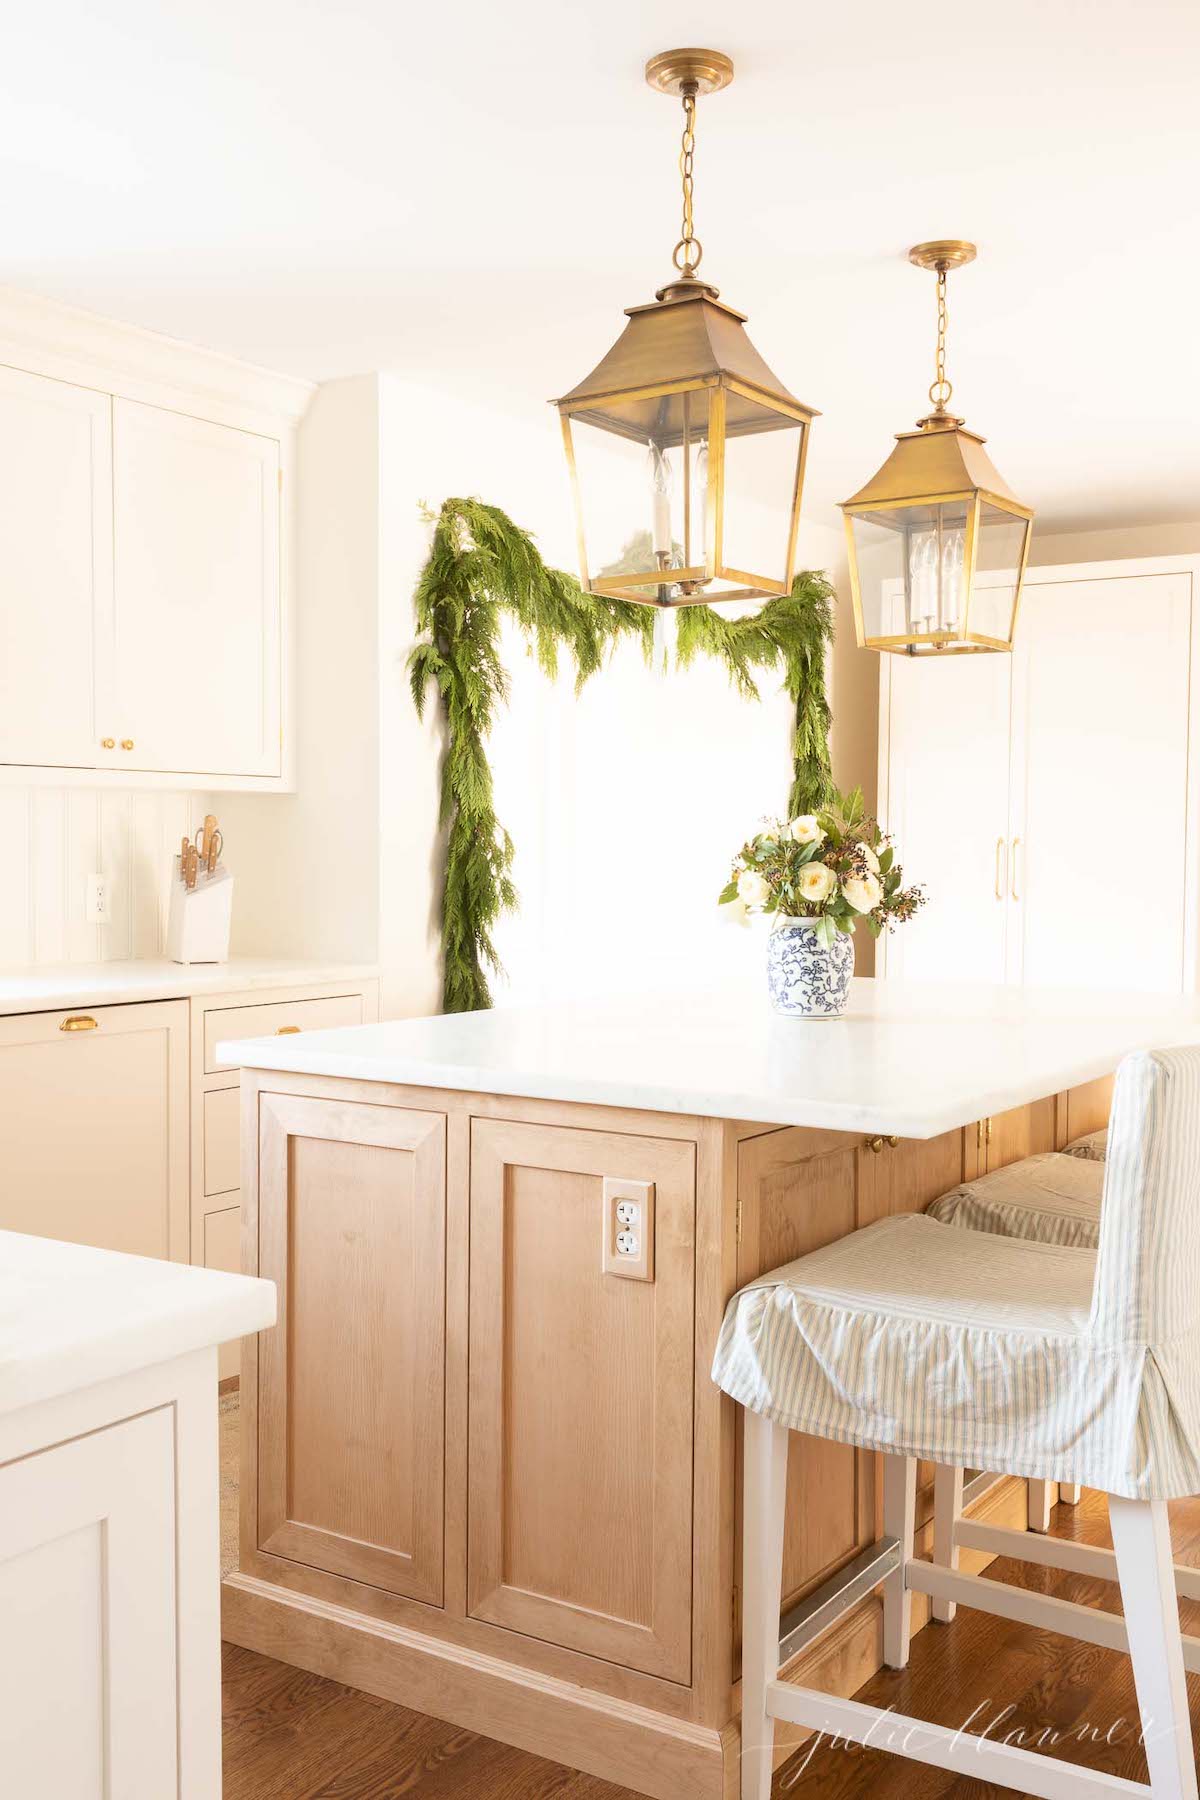 A white kitchen with a white island adorned with greenery for a touch of holiday cheer.